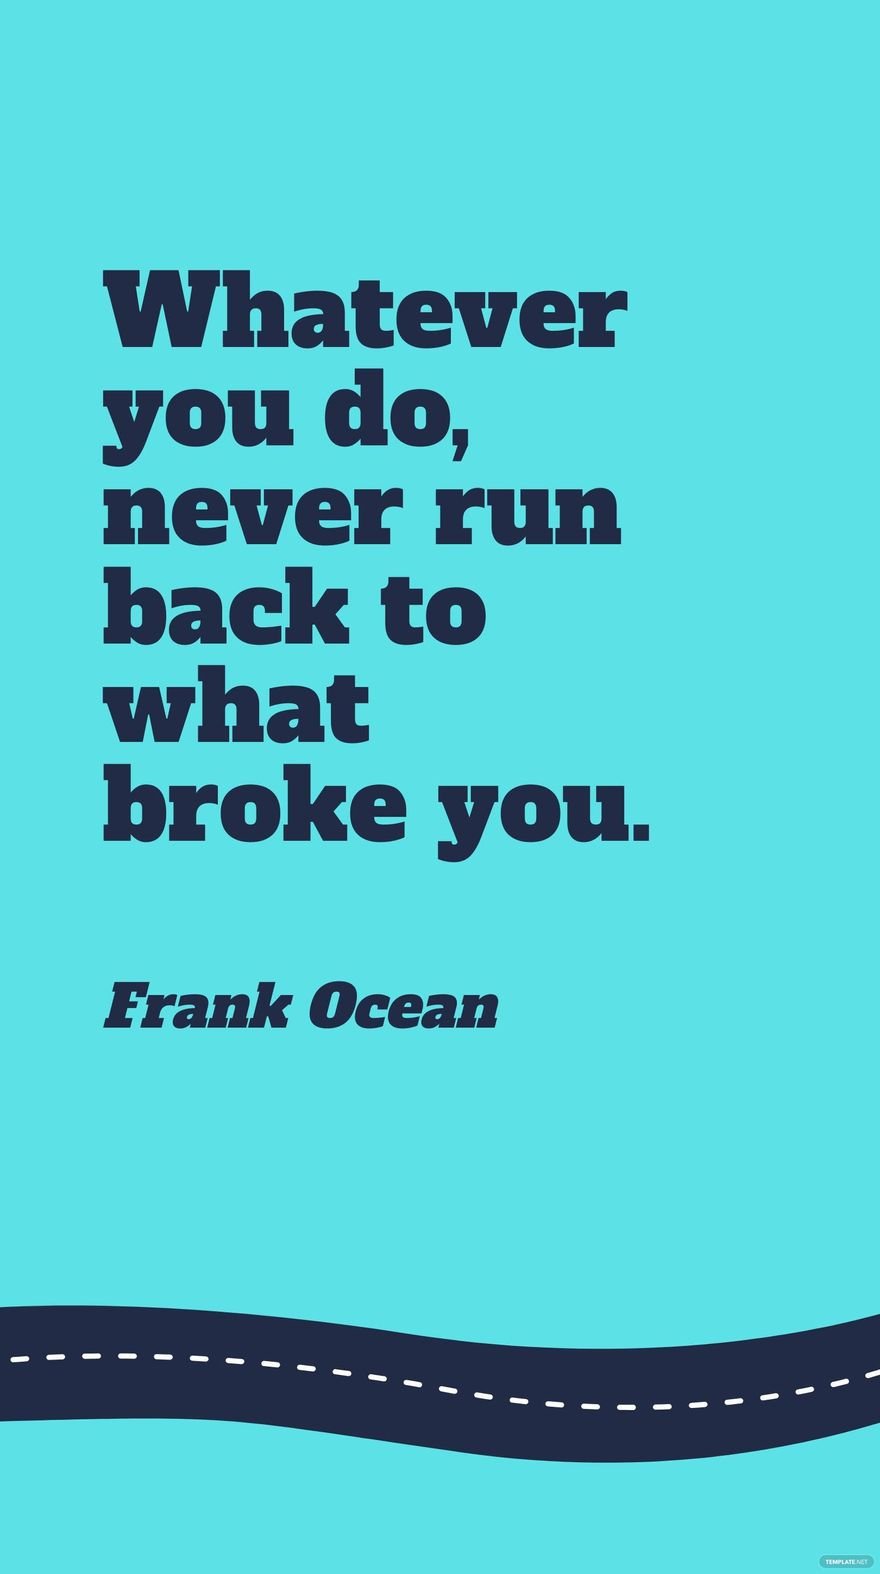 Frank Ocean - Whatever you do, never run back to what broke you.